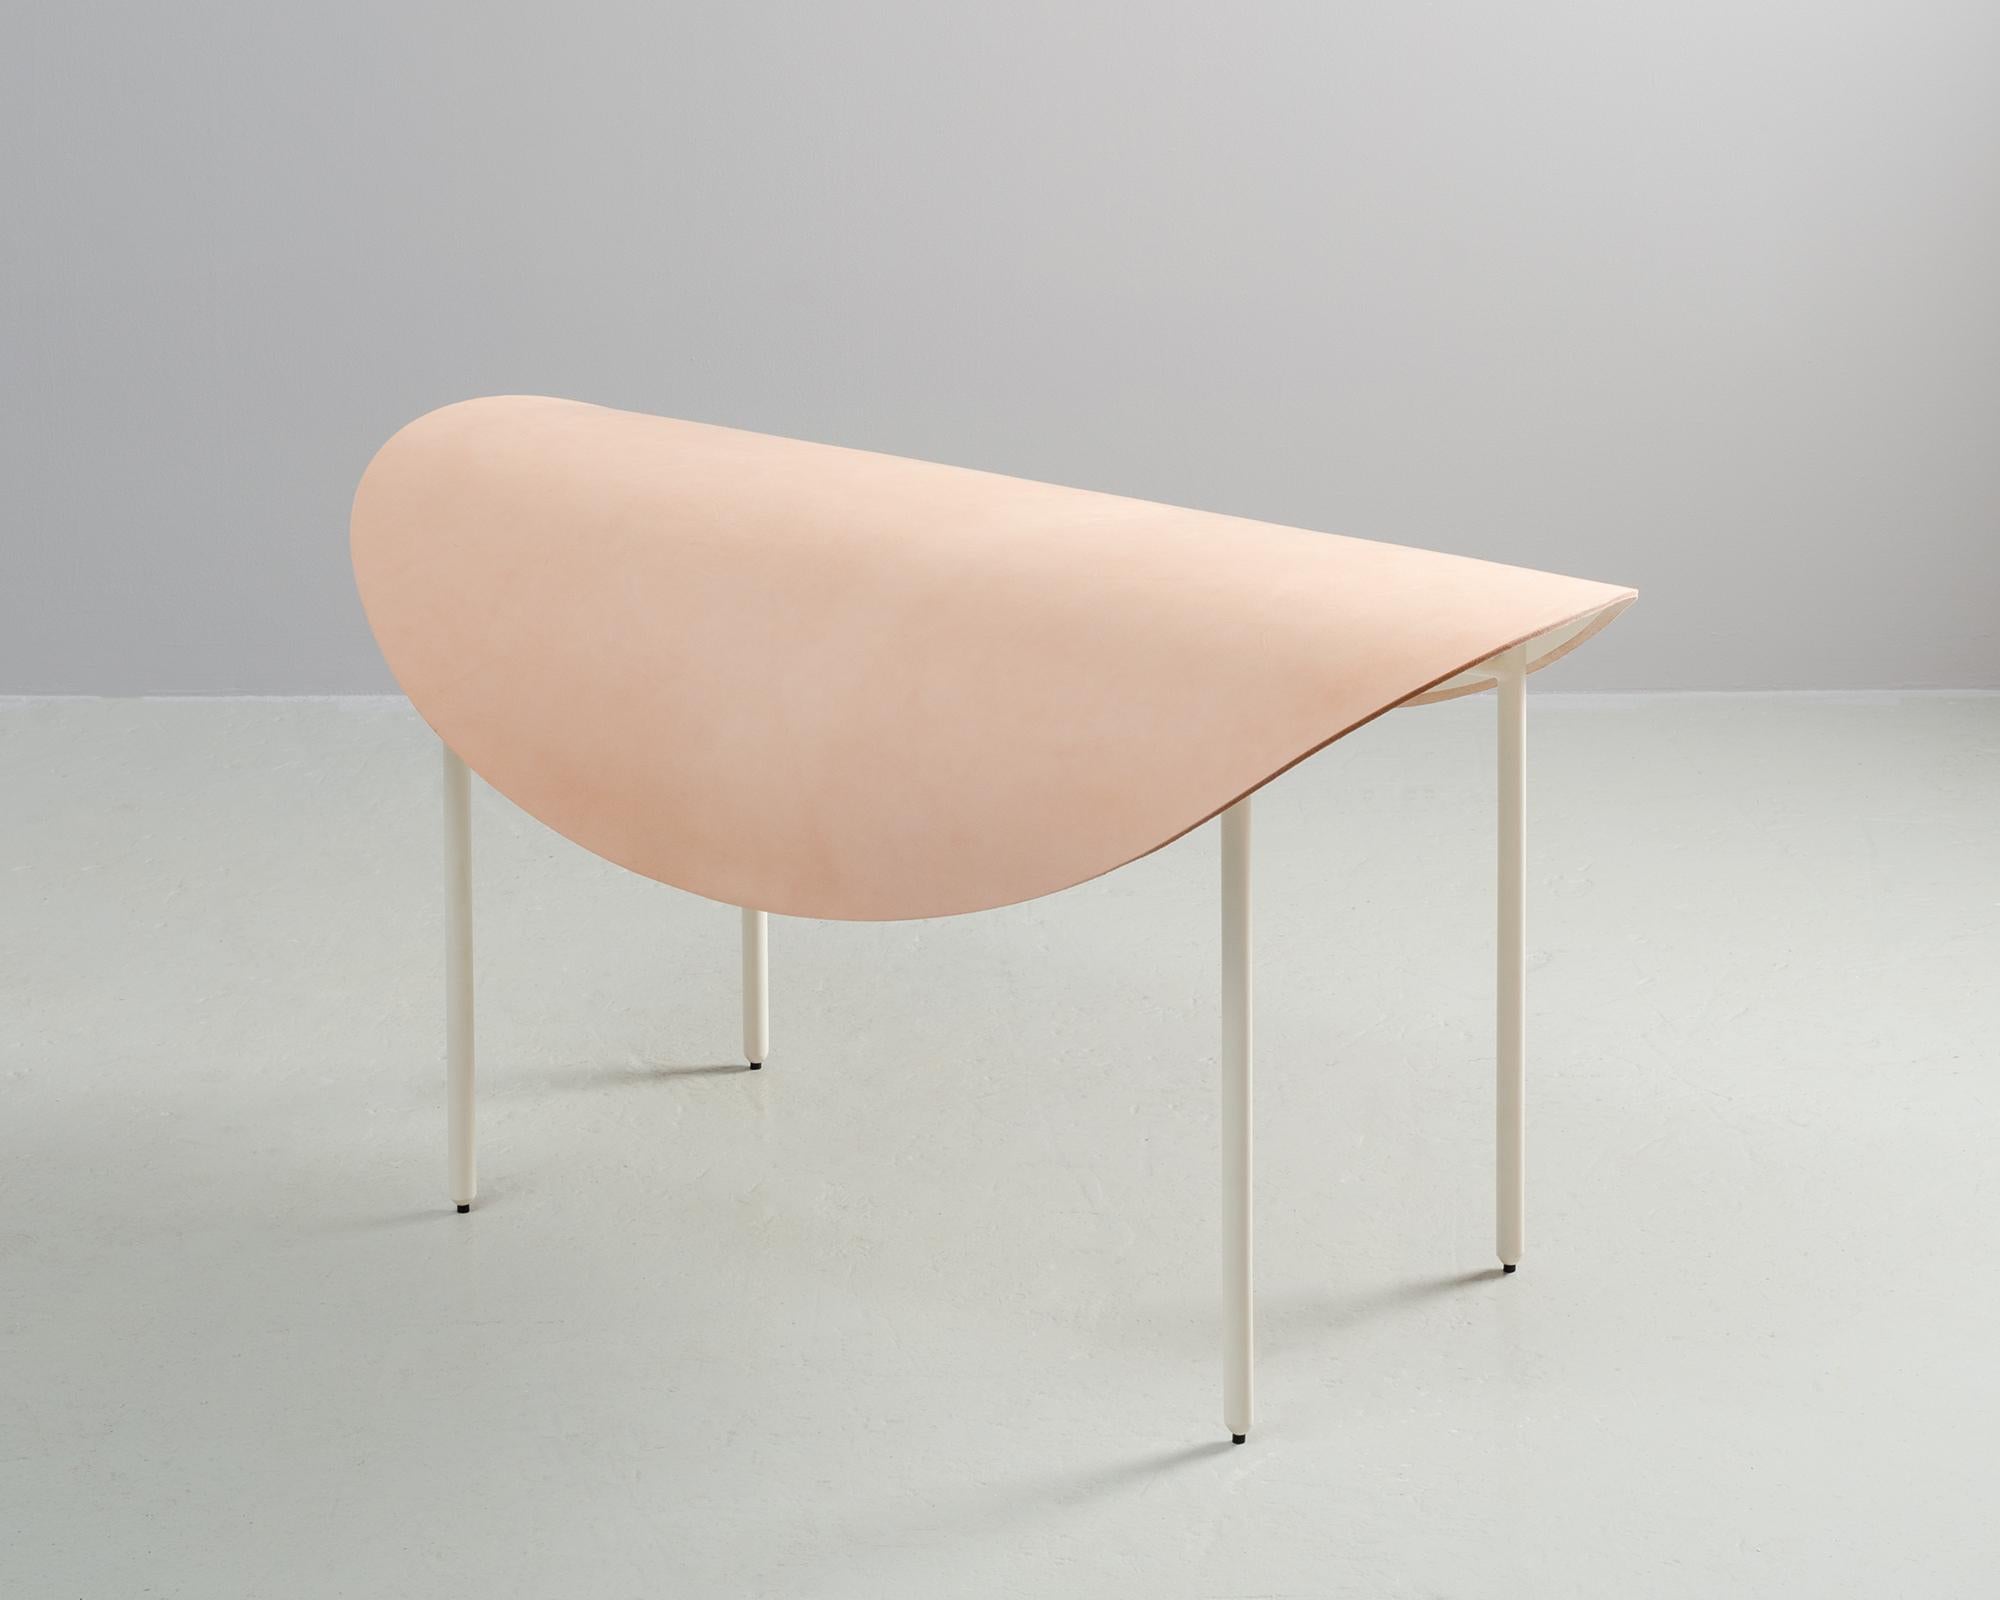 The Tack Bench, Calen Knauf, Black and Beige, Steel Leather  im Zustand „Neu“ im Angebot in Vancouver, BC